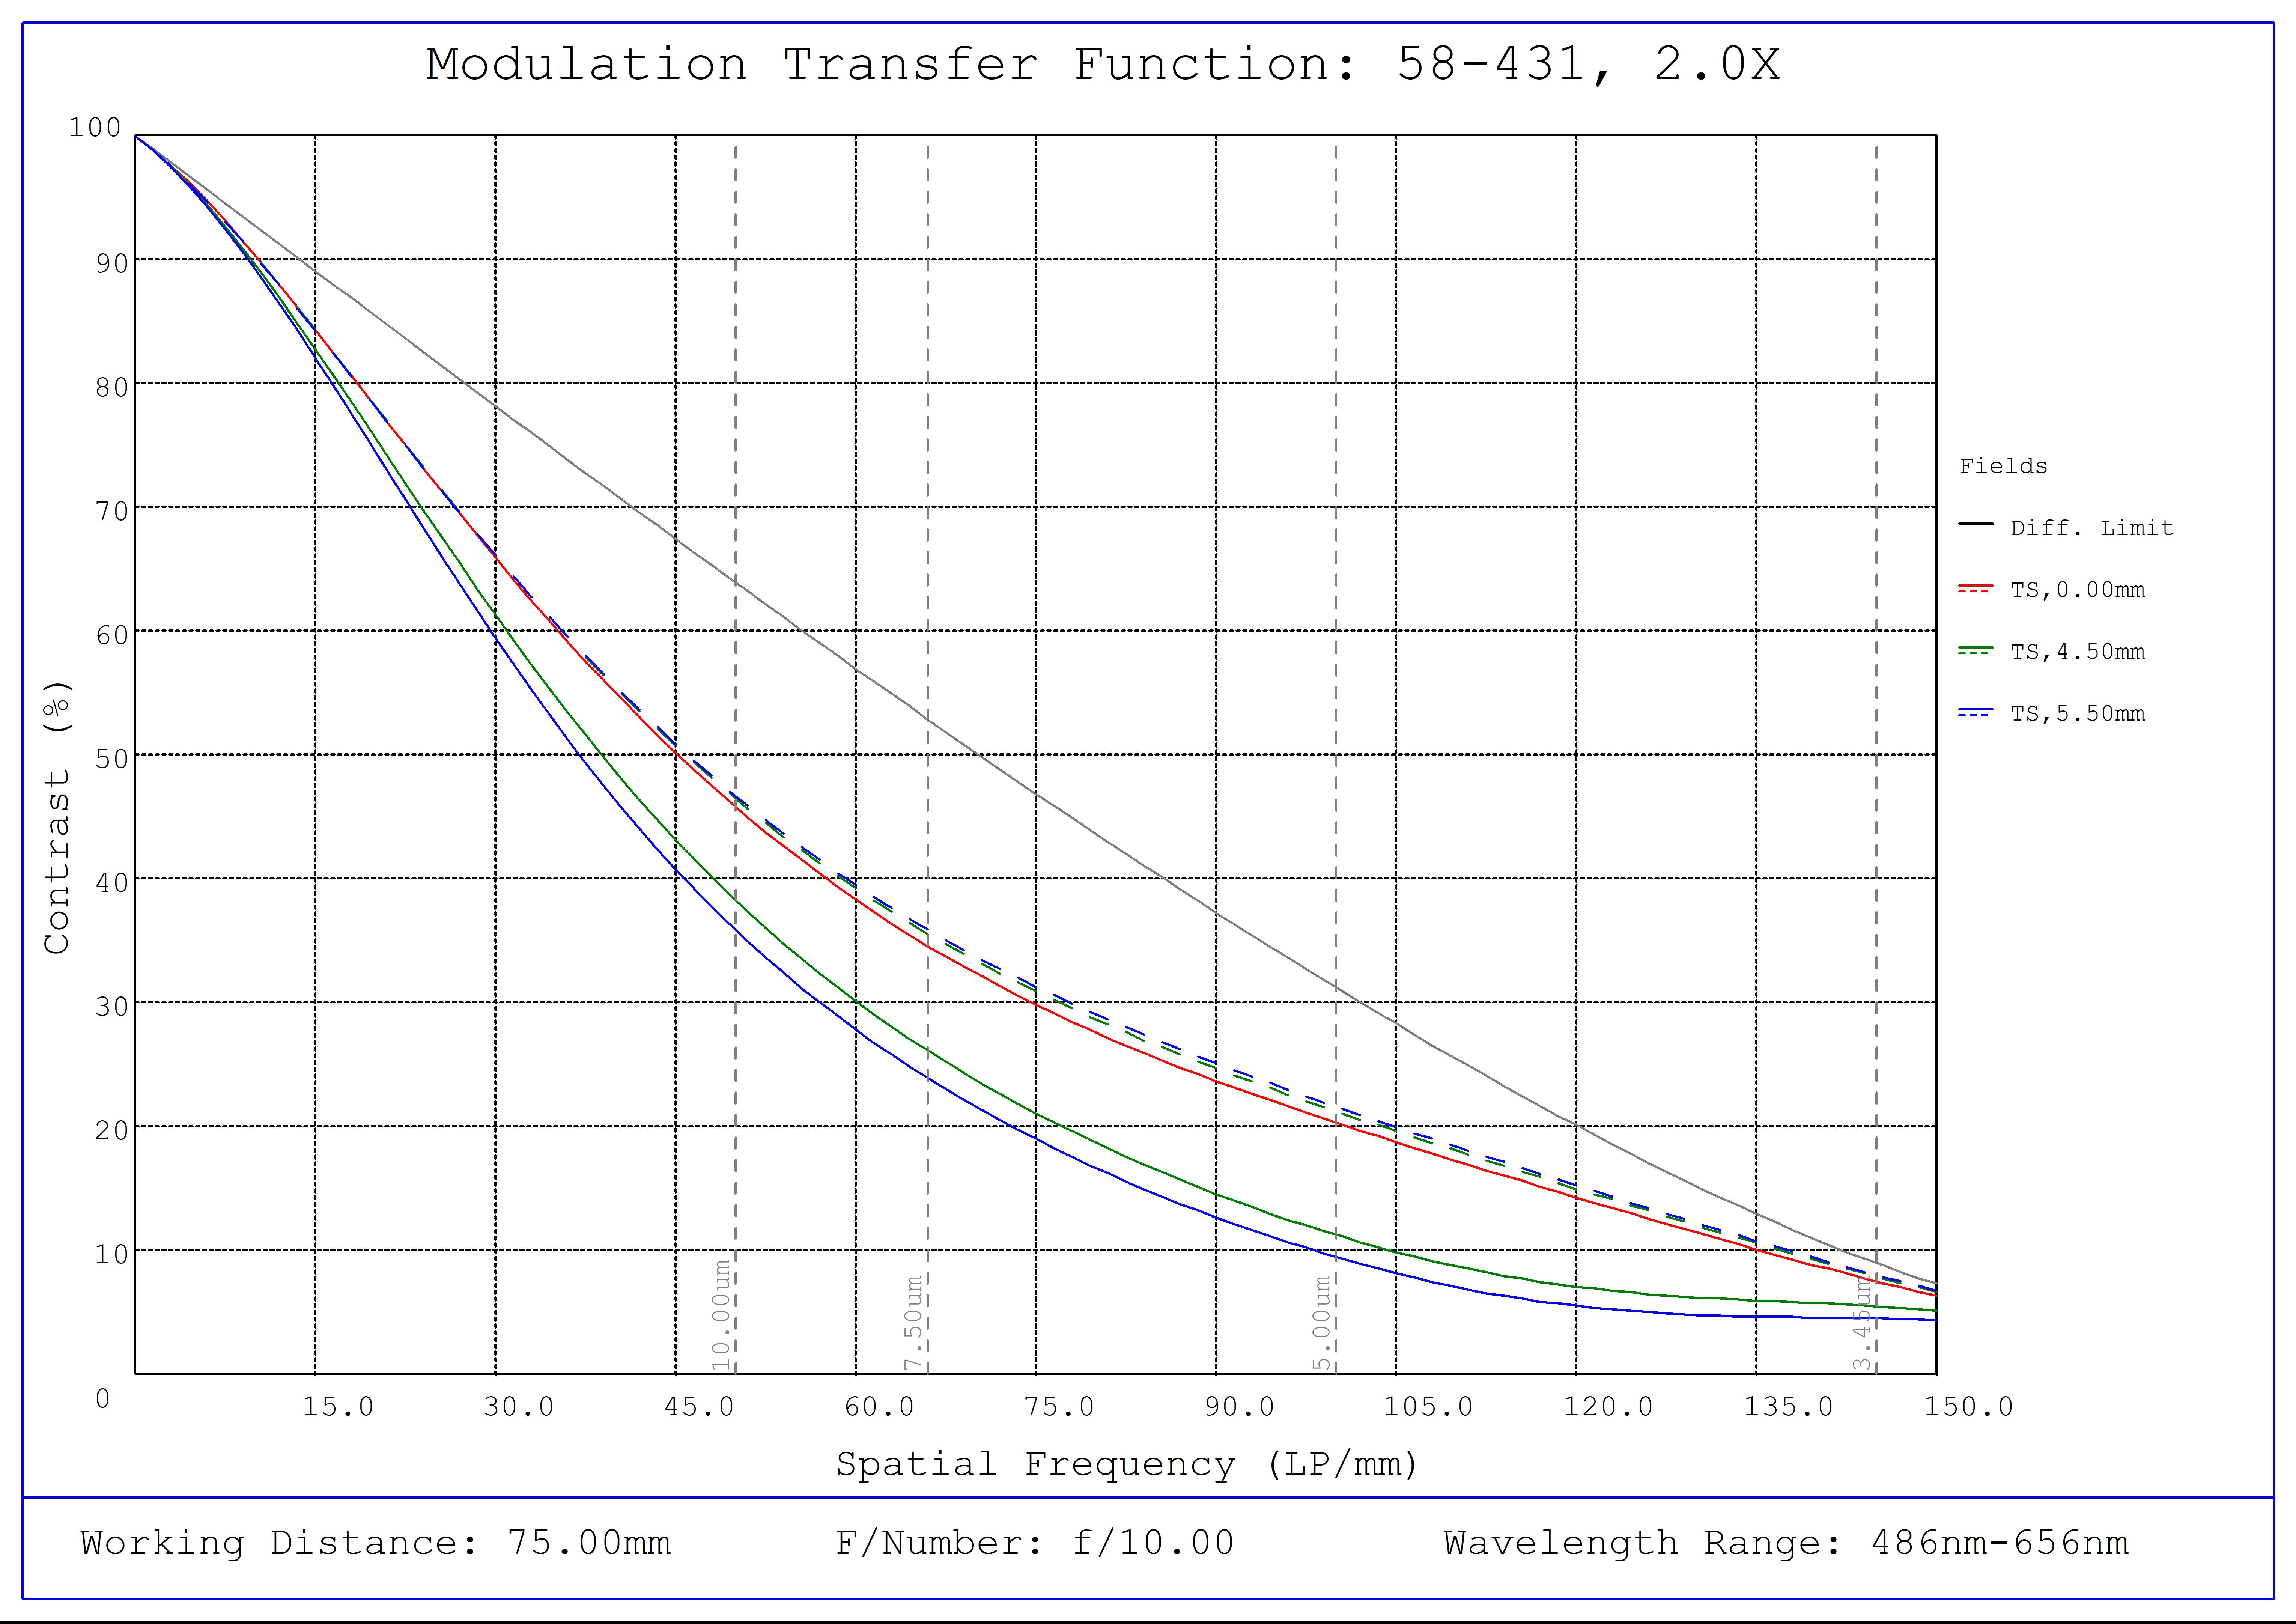 #58-431, 2.0X SilverTL™ Telecentric Lens, Modulated Transfer Function (MTF) Plot, 75mm Working Distance, f10